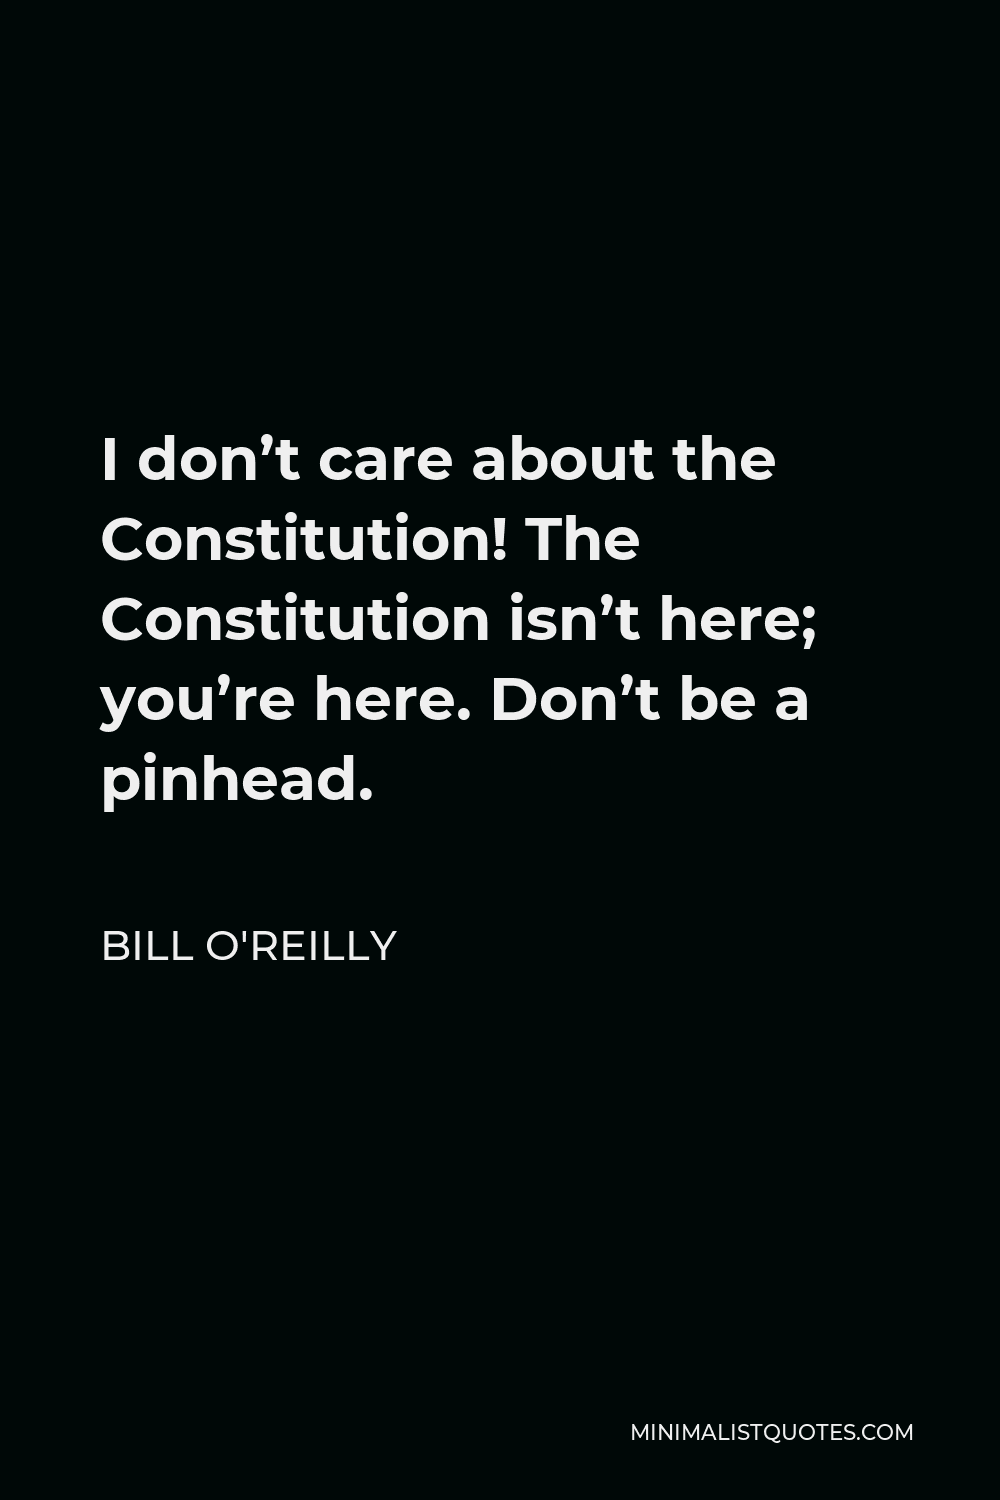 Bill O'Reilly Quote - I don’t care about the Constitution! The Constitution isn’t here; you’re here. Don’t be a pinhead.